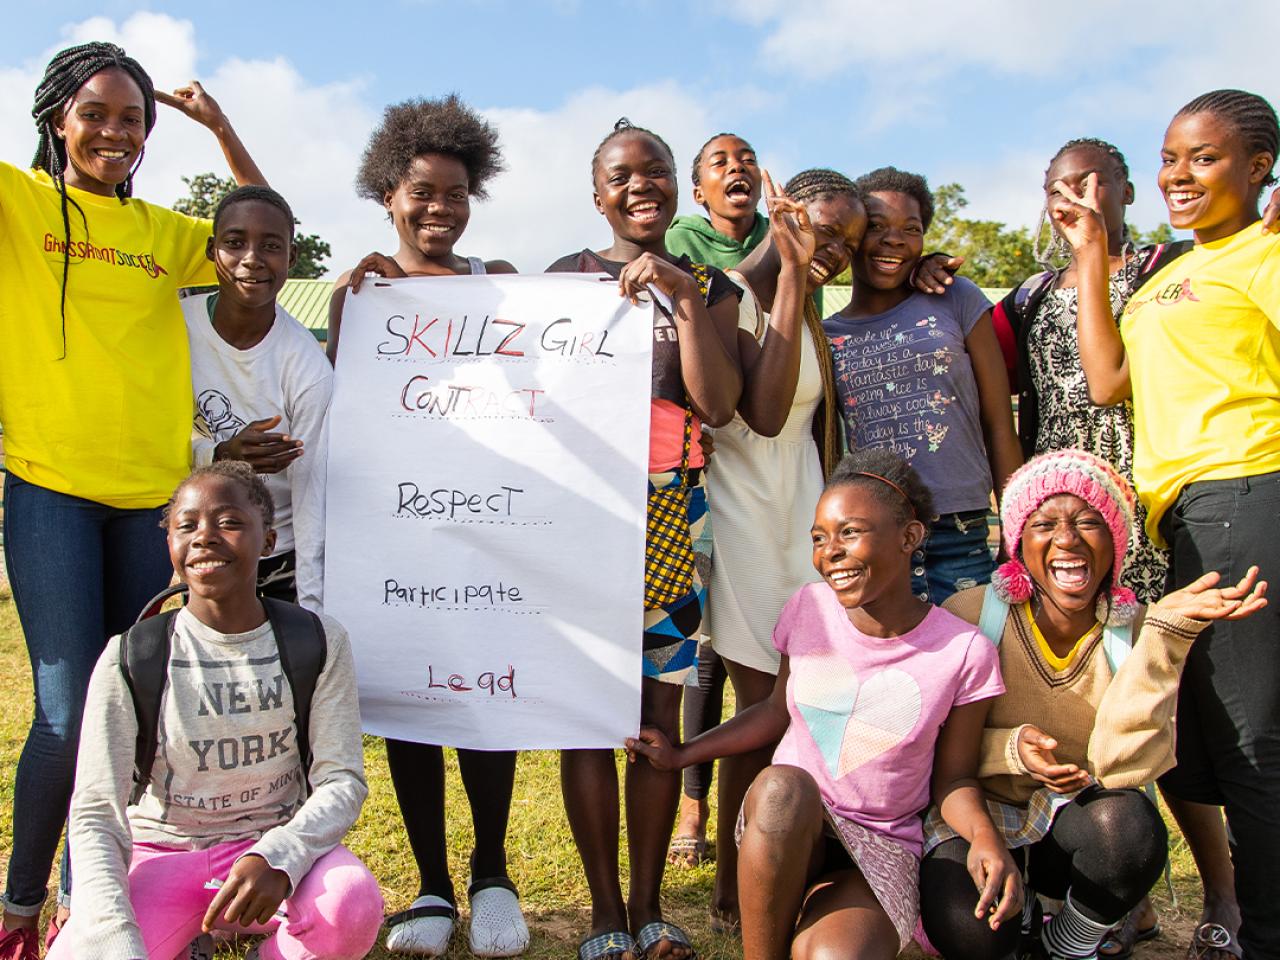 A group of youths smiling, posing for the camera on an open field, holding a sign "Skills Girl contract."